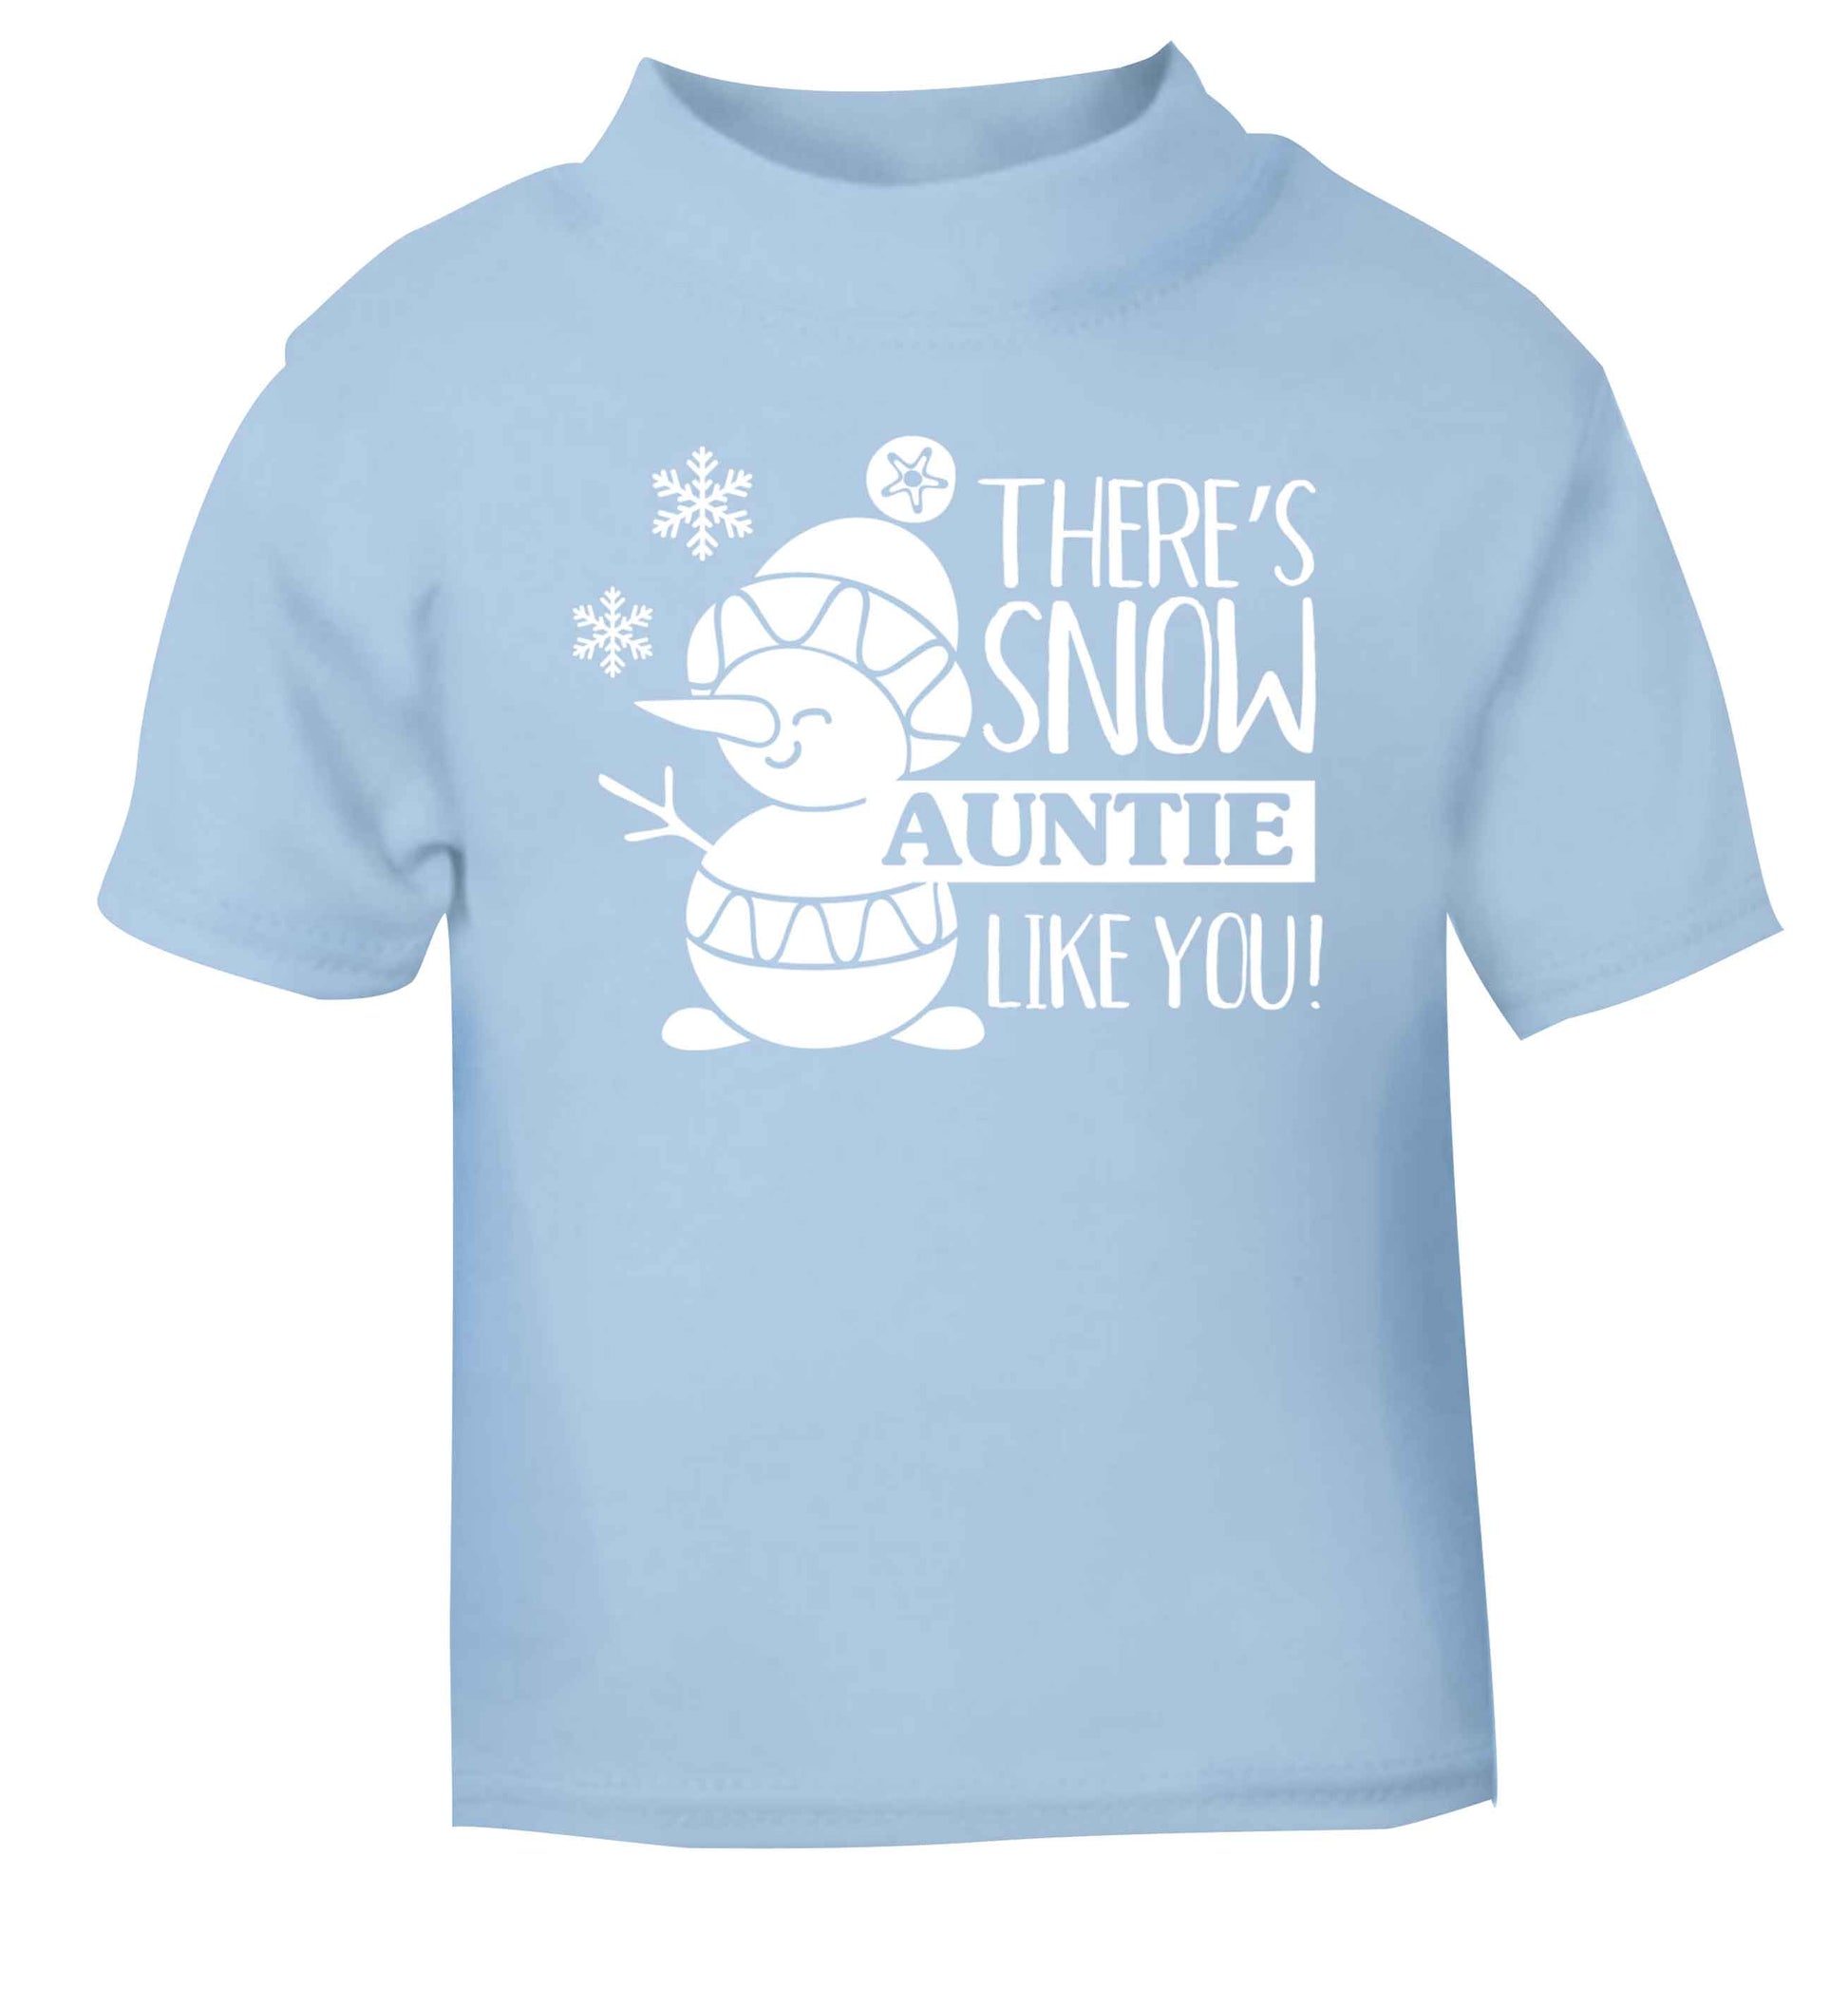 There's snow auntie like you light blue baby toddler Tshirt 2 Years